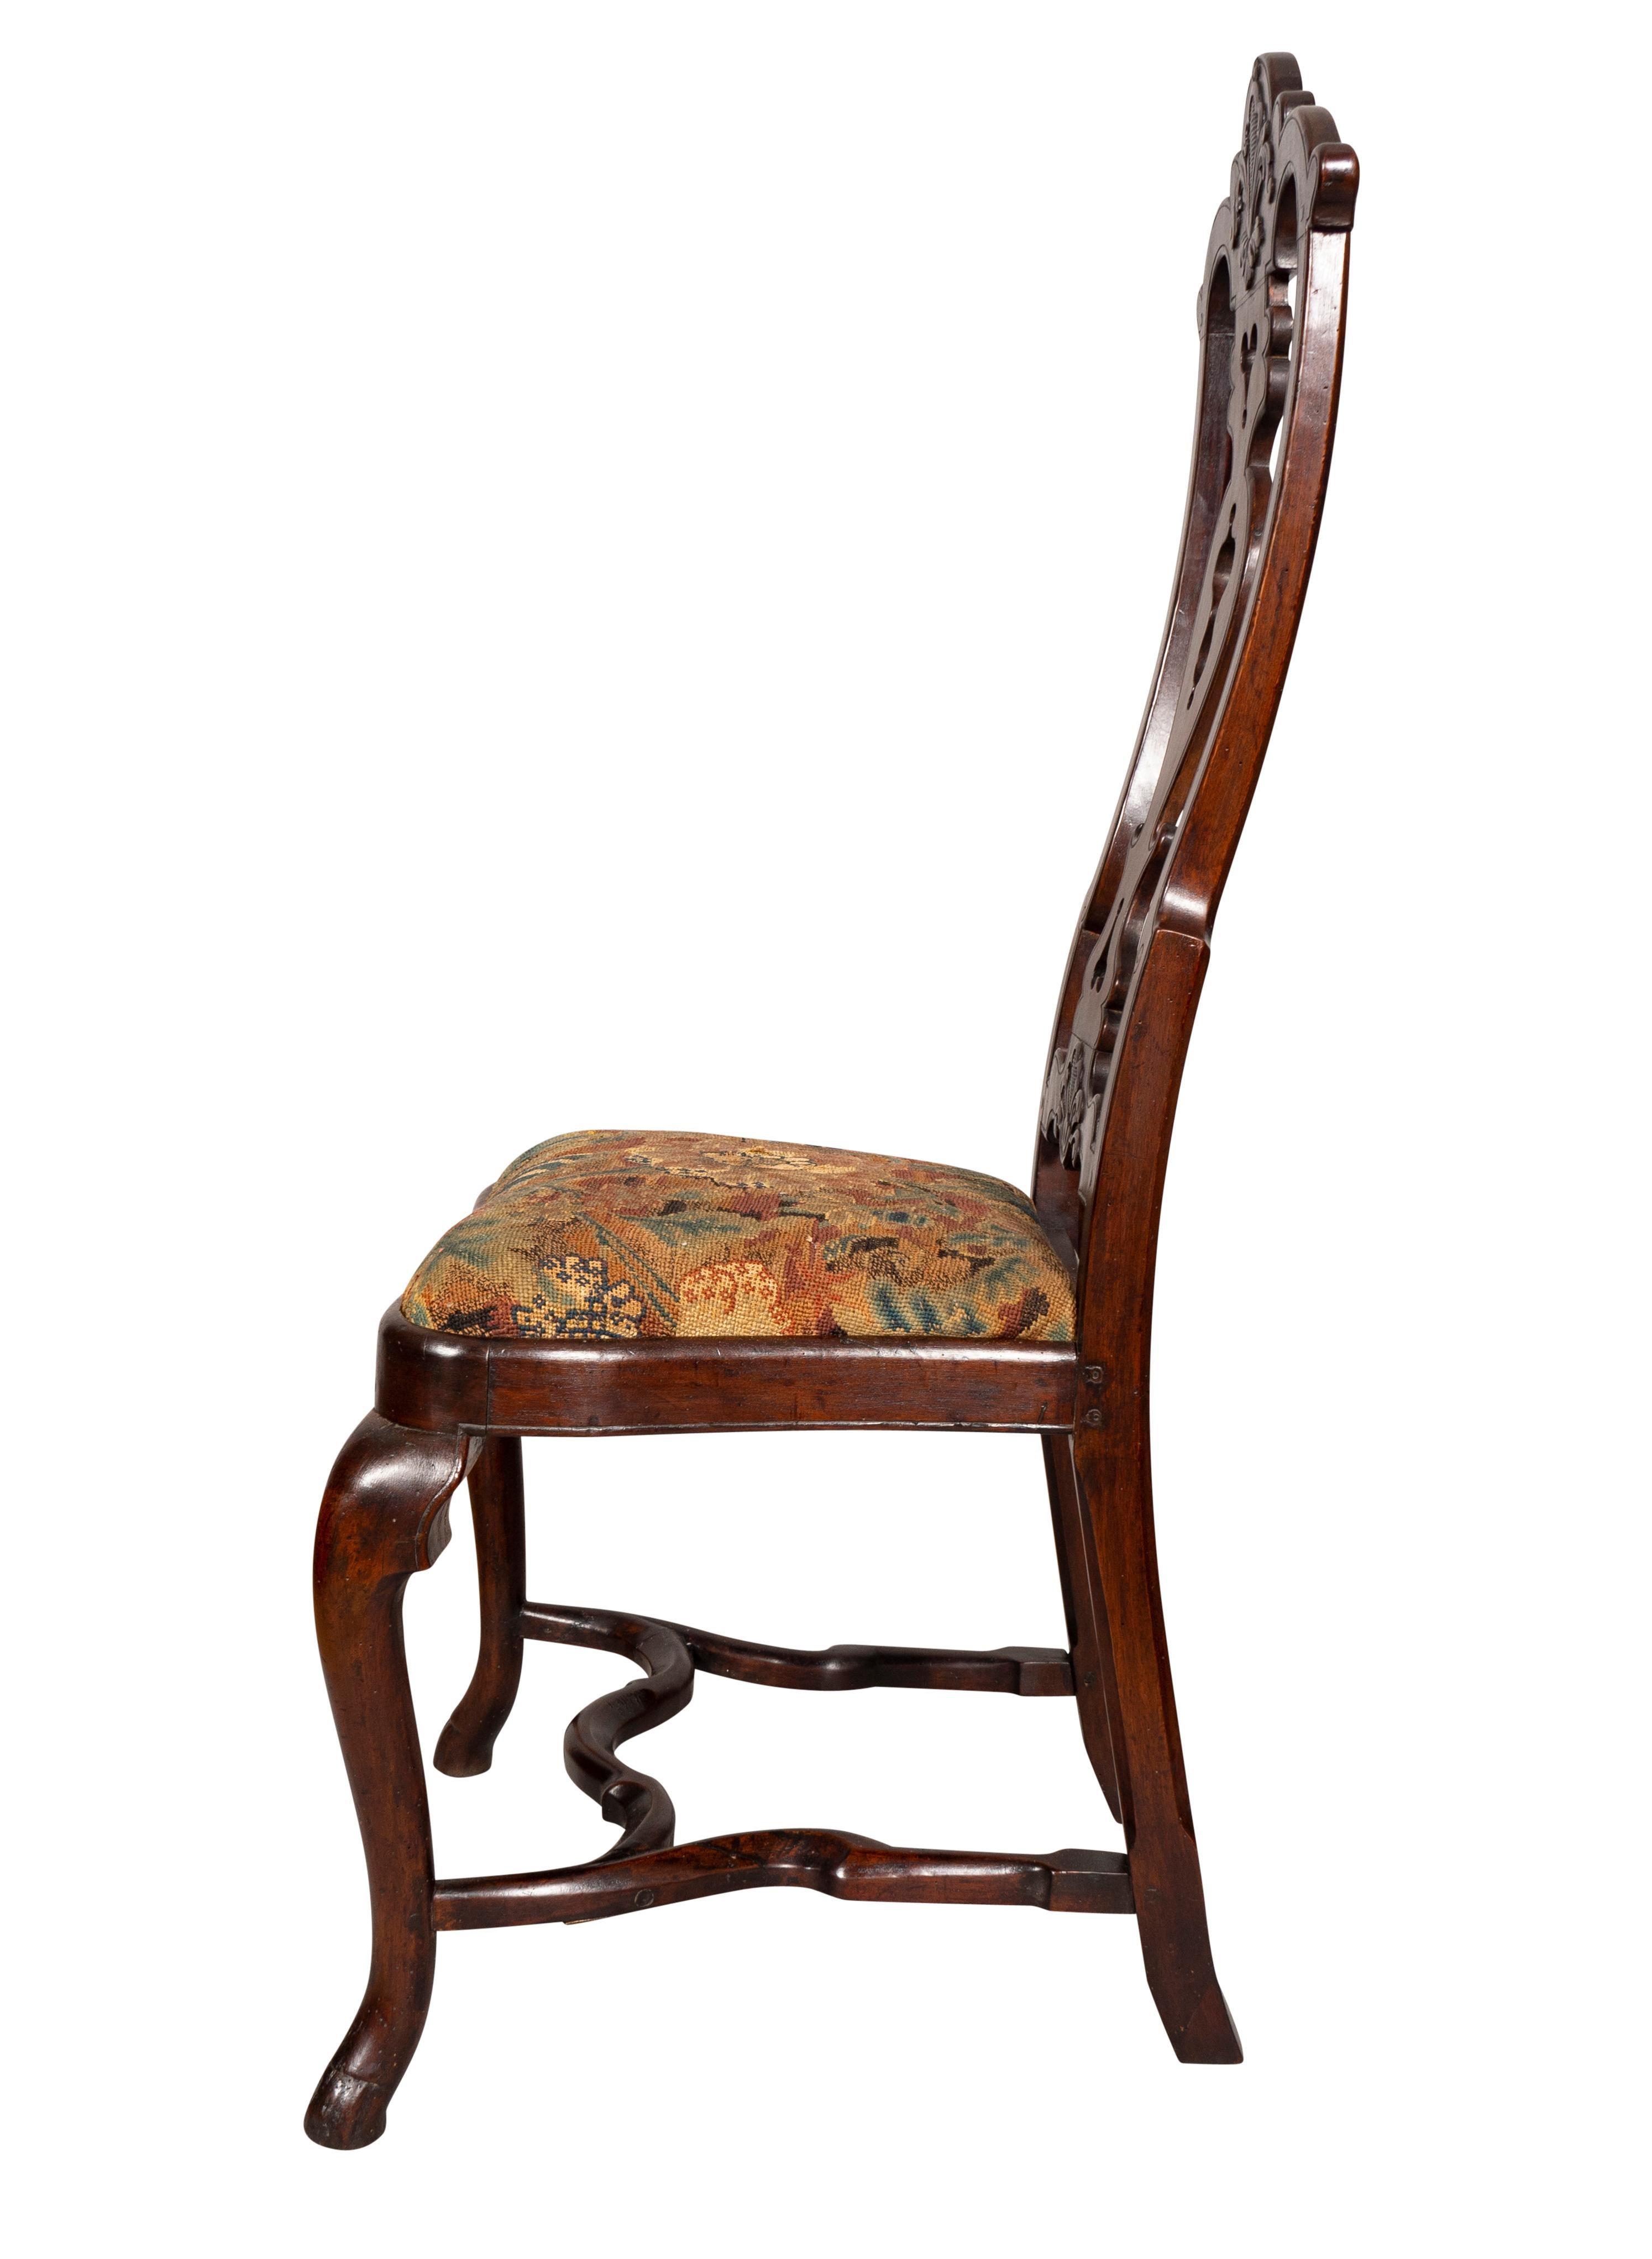 Early 18th Century Flemish Baroque Walnut Side Chair For Sale